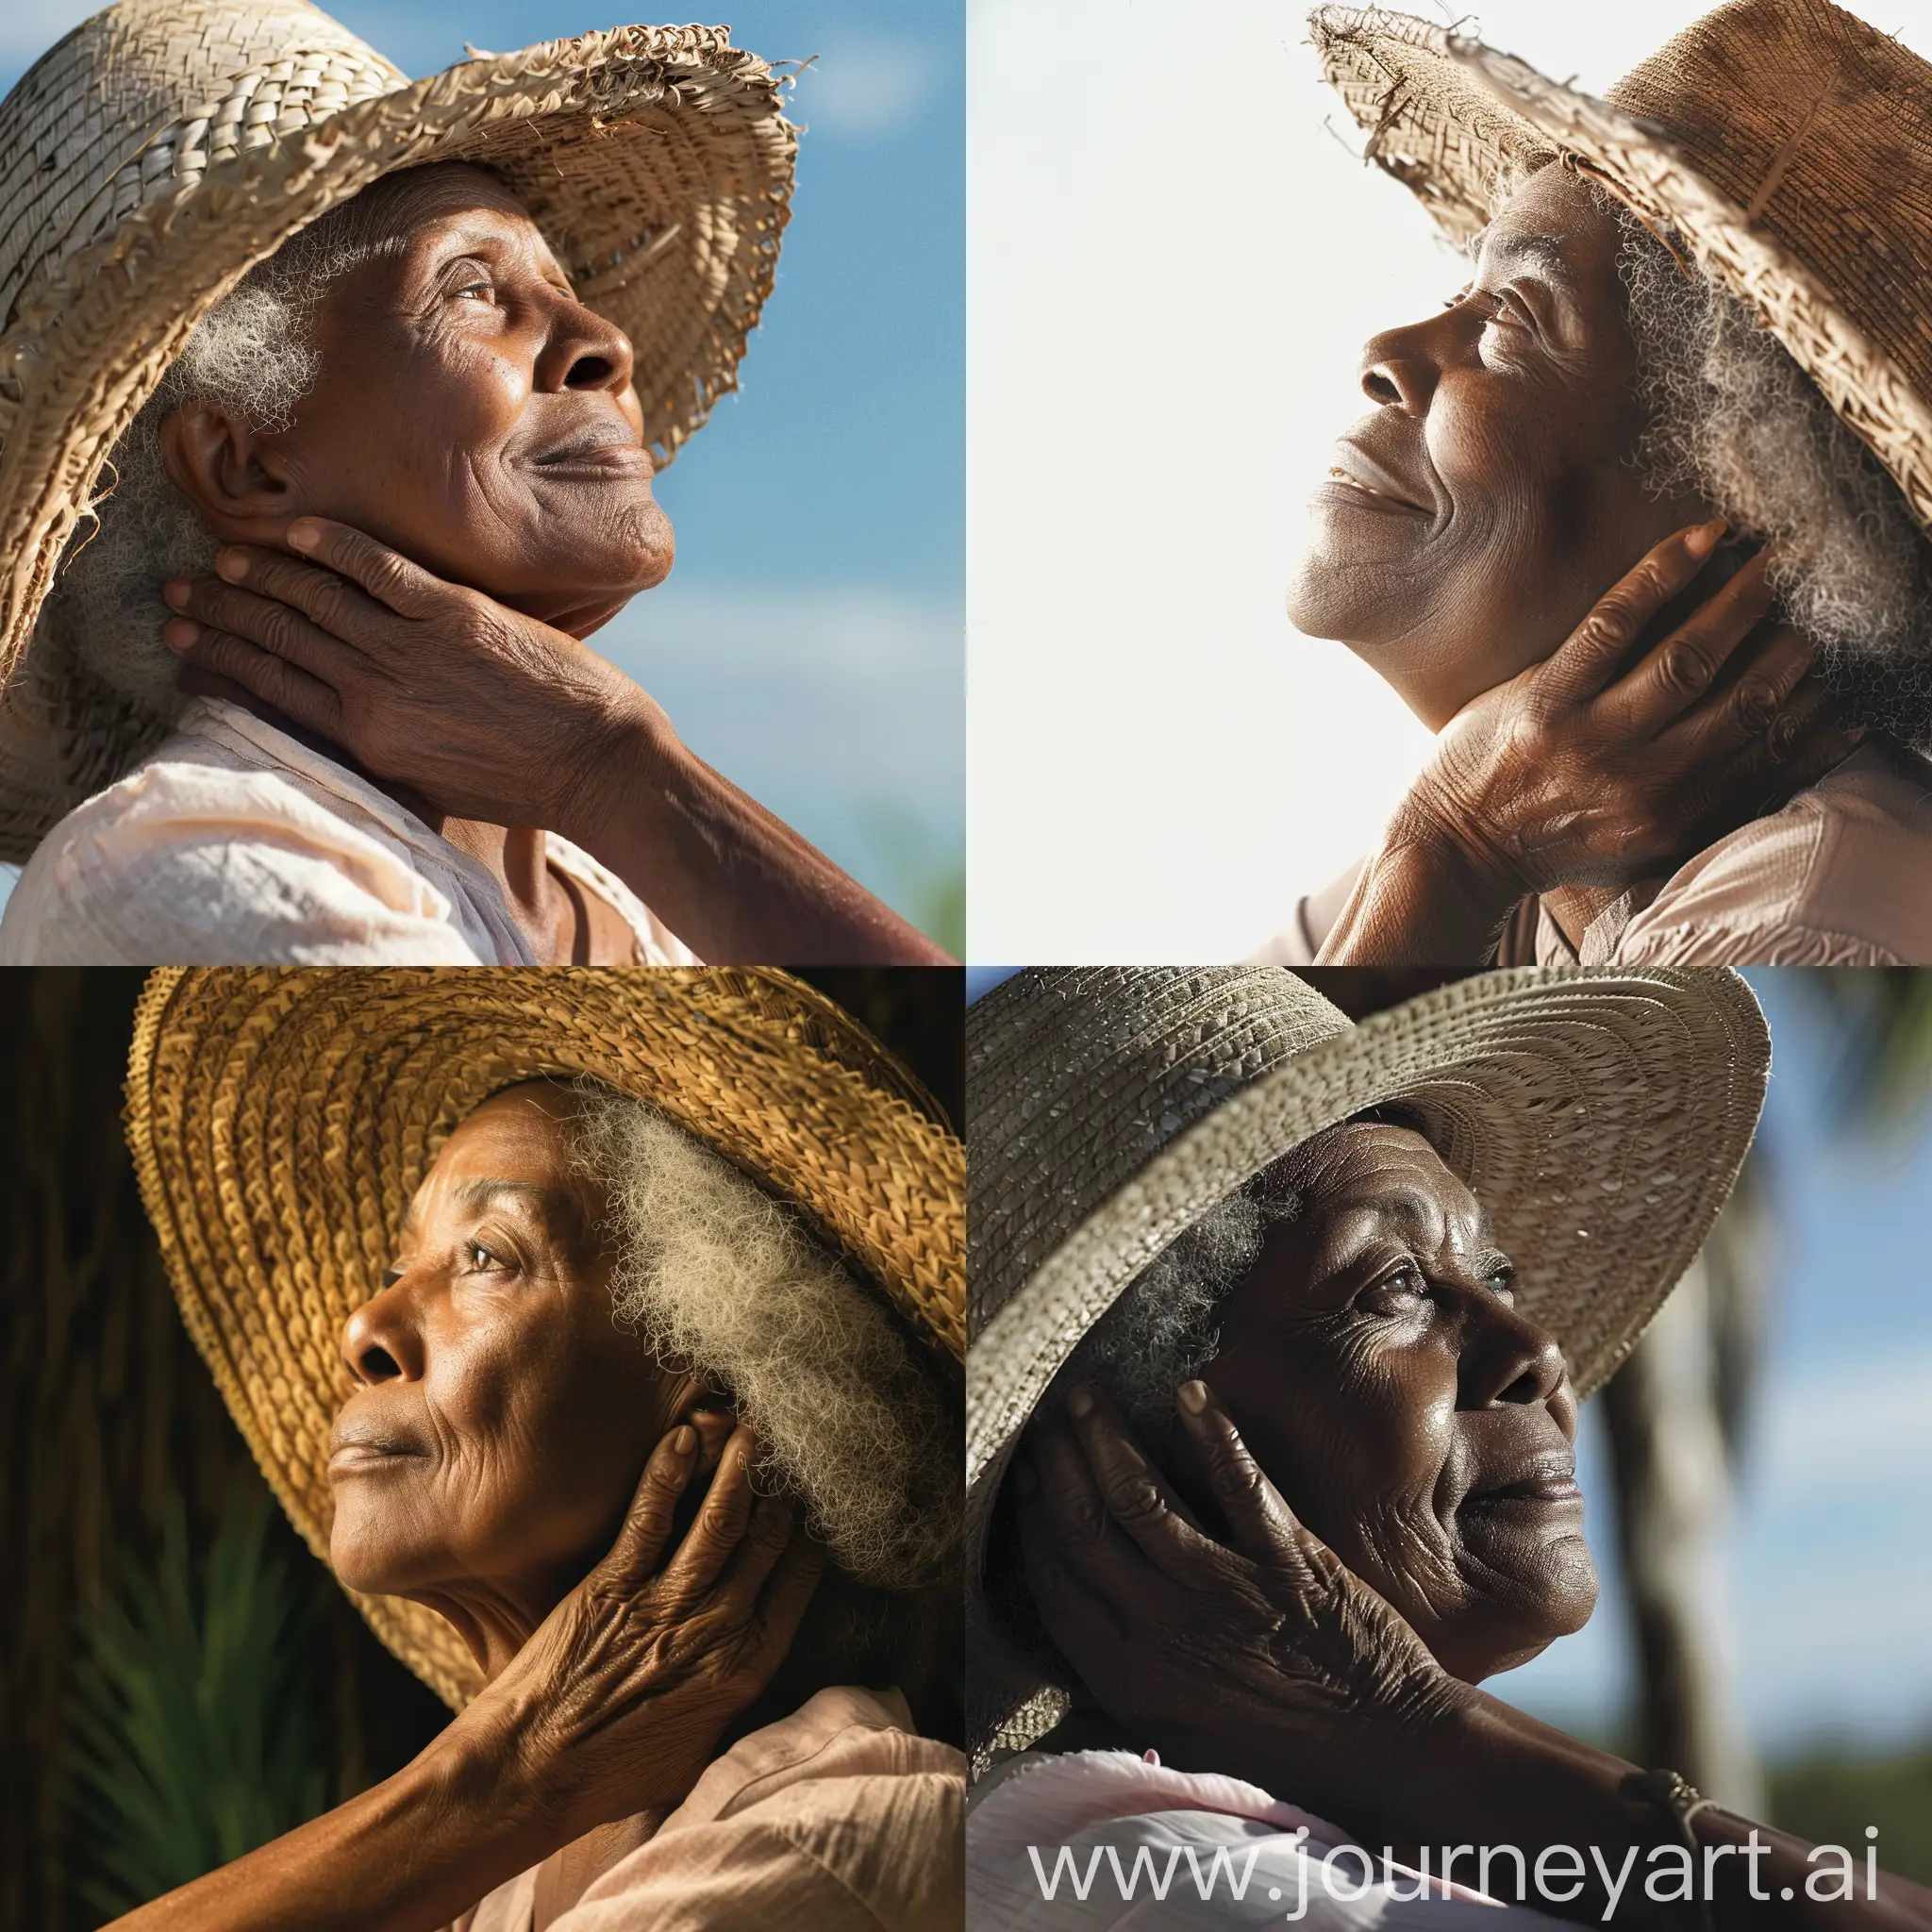 Elegant-68YearOld-African-Woman-in-Straw-Hat-with-Reflective-Expression